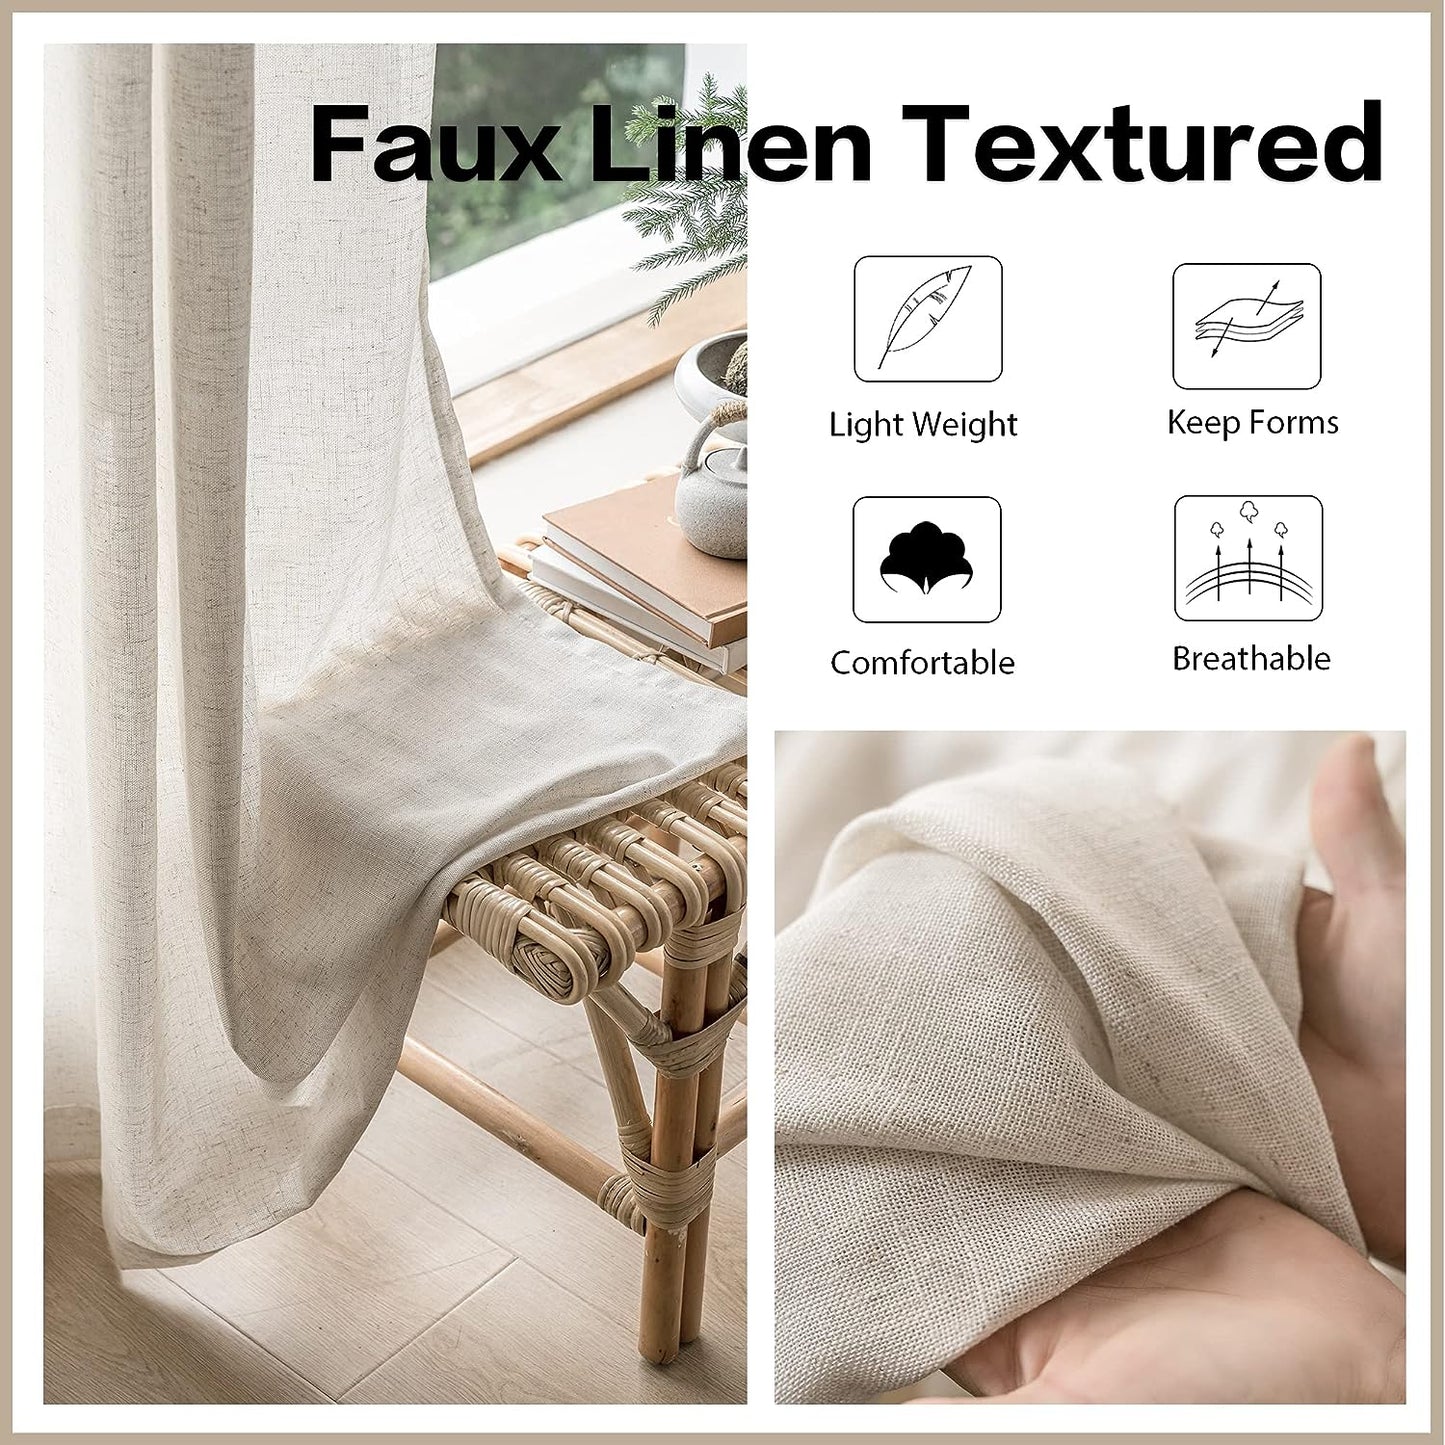 MAIHER Extra Wide Pinch Pleated Drapes 108 Inches Long, Faux Linen Light Filtering Semi Sheer Curtains with Hooks for Living Room Bedroom, Natural Linen (1 Panel, 100 W X 108 L)  MAIHER   